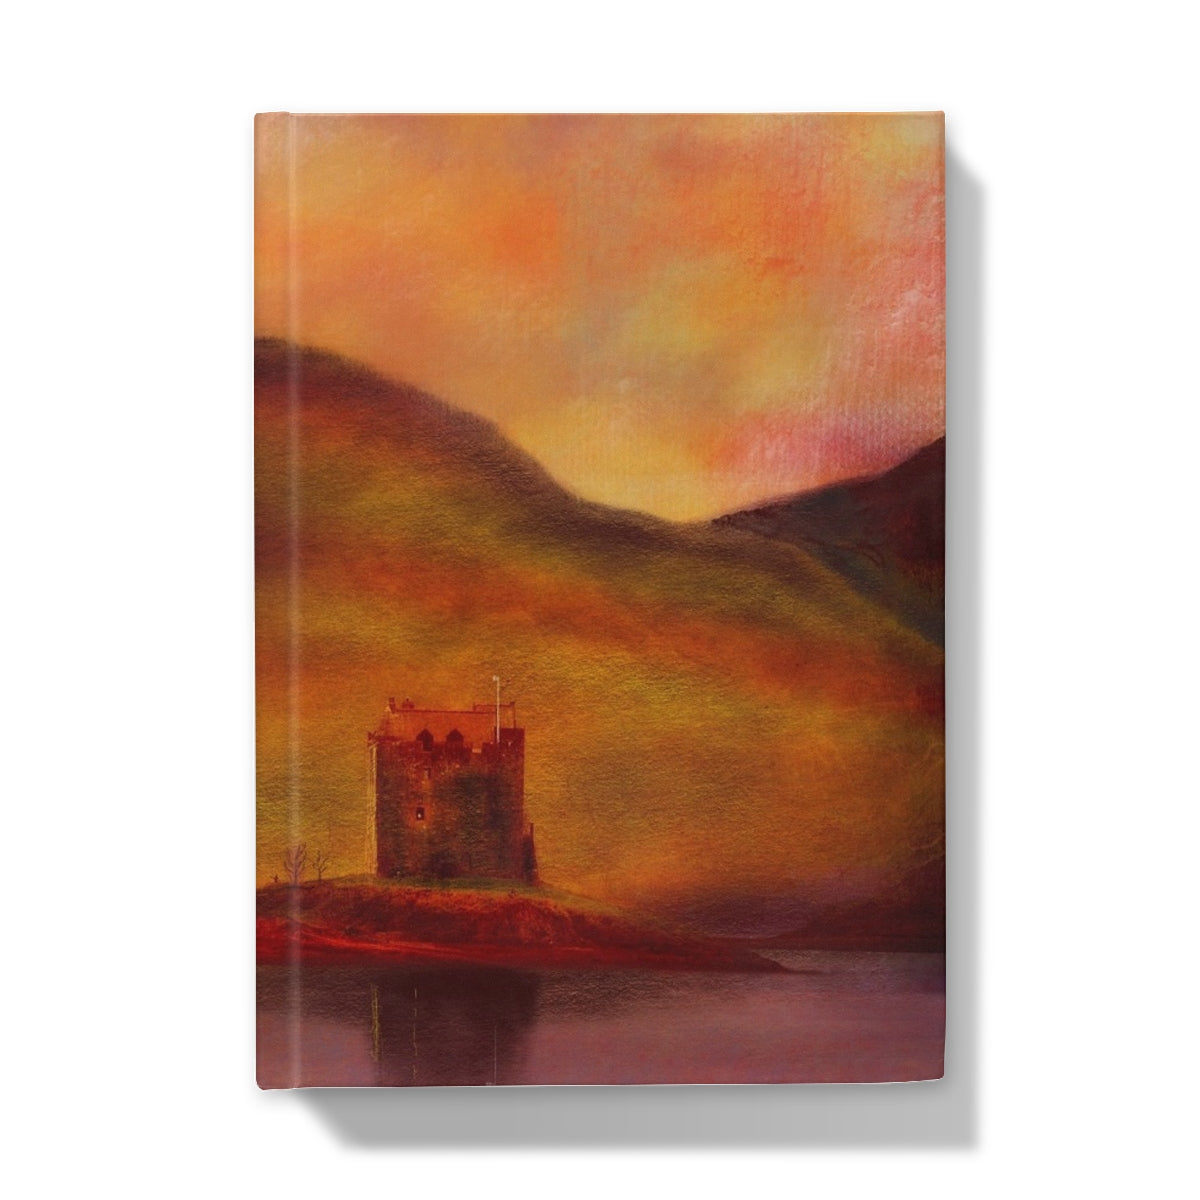 Castle Stalker Sunset Art Gifts Hardback Journal-Journals & Notebooks-Historic & Iconic Scotland Art Gallery-A4-Lined-Paintings, Prints, Homeware, Art Gifts From Scotland By Scottish Artist Kevin Hunter